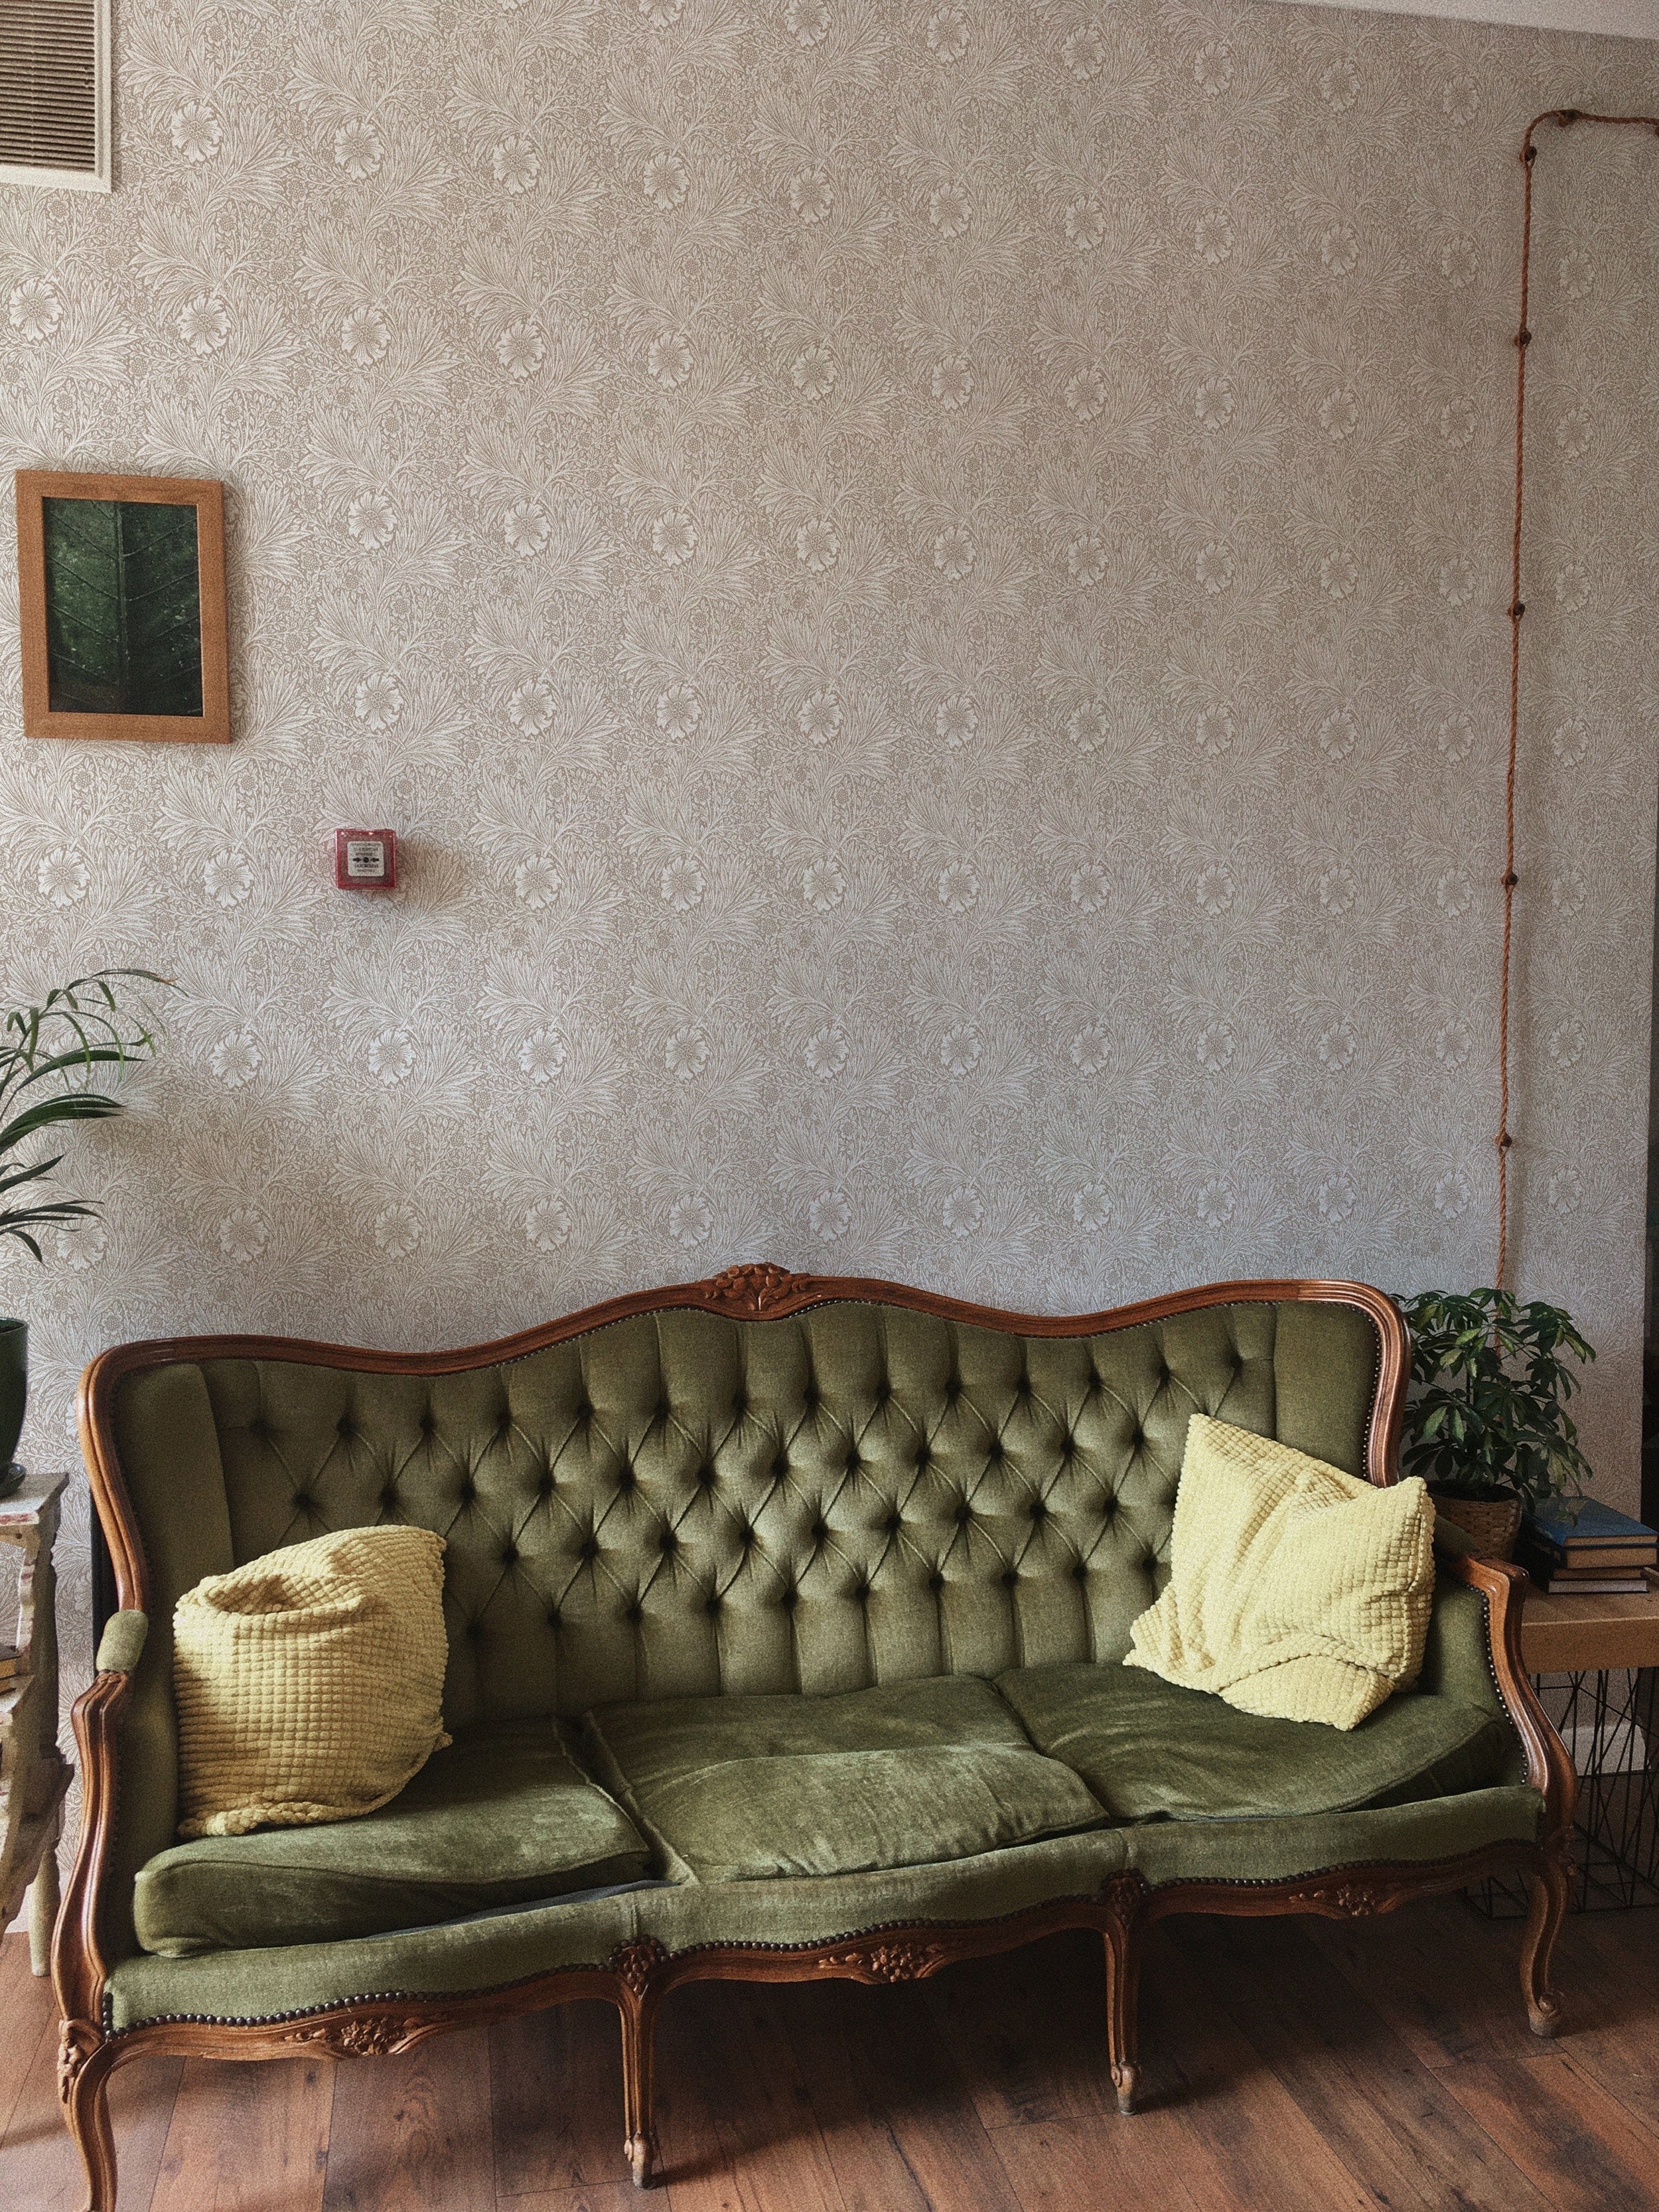 Classic living room corner decorated with Timeless Floral Wallpaper, showcasing soft beige floral designs behind a vintage tufted green velvet sofa.